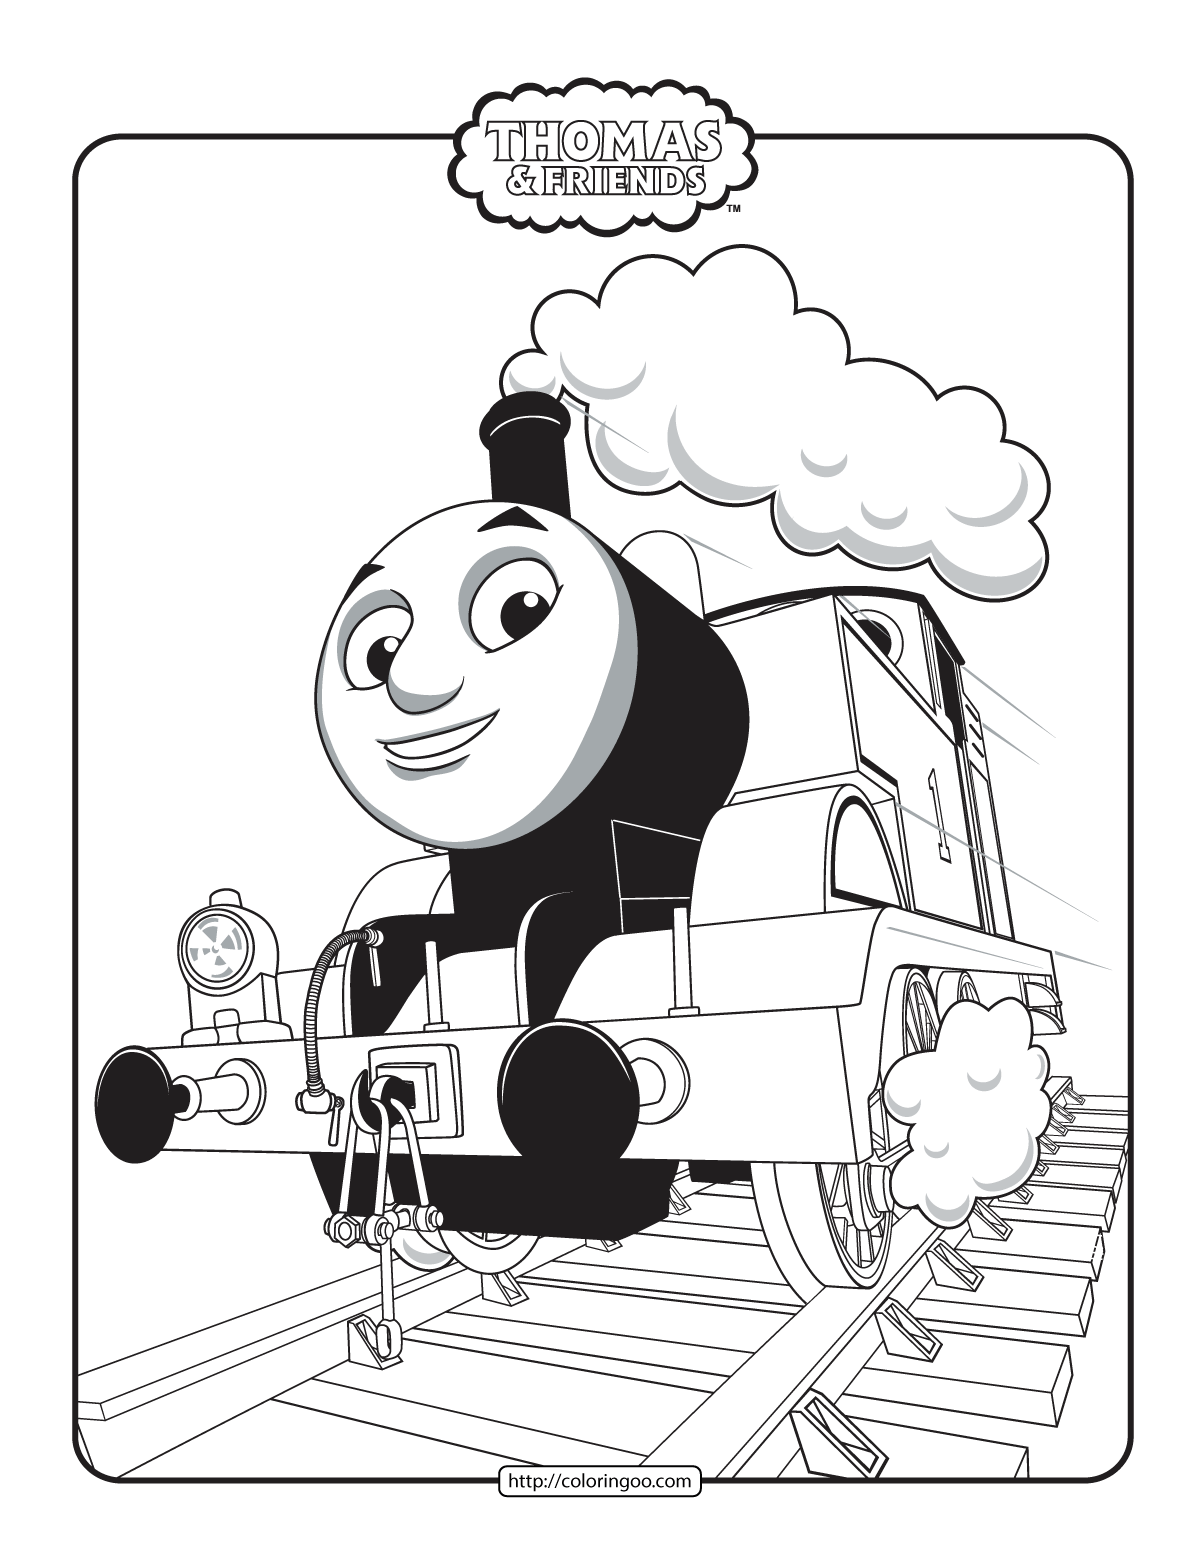 thomas and friends coloring sheet for kids